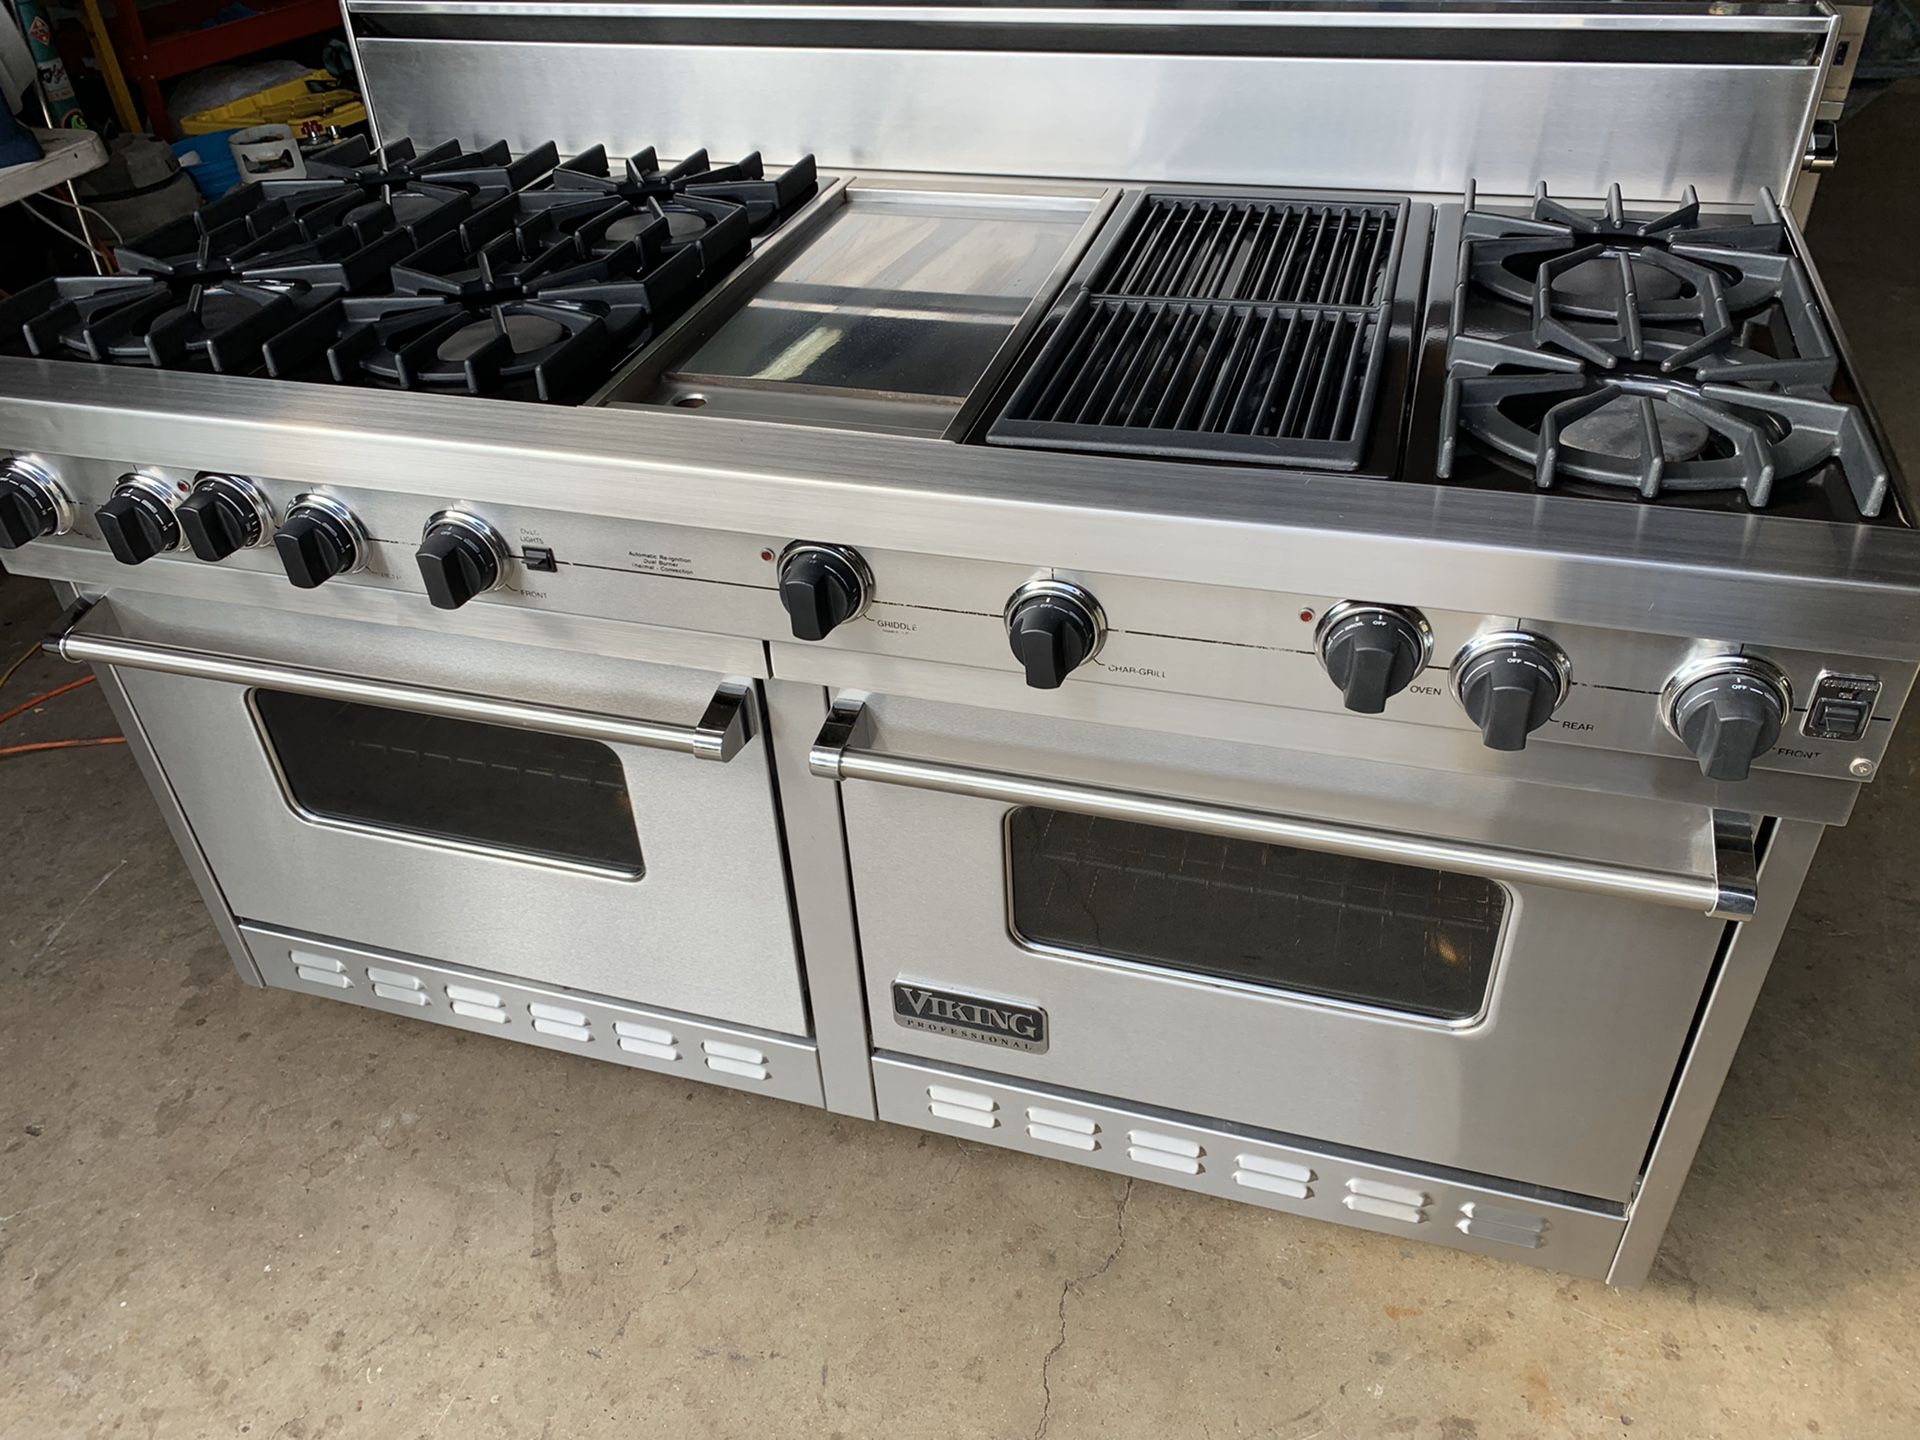 Viking 60” propane range with grill and griddle, 6 burners and two large ovens.